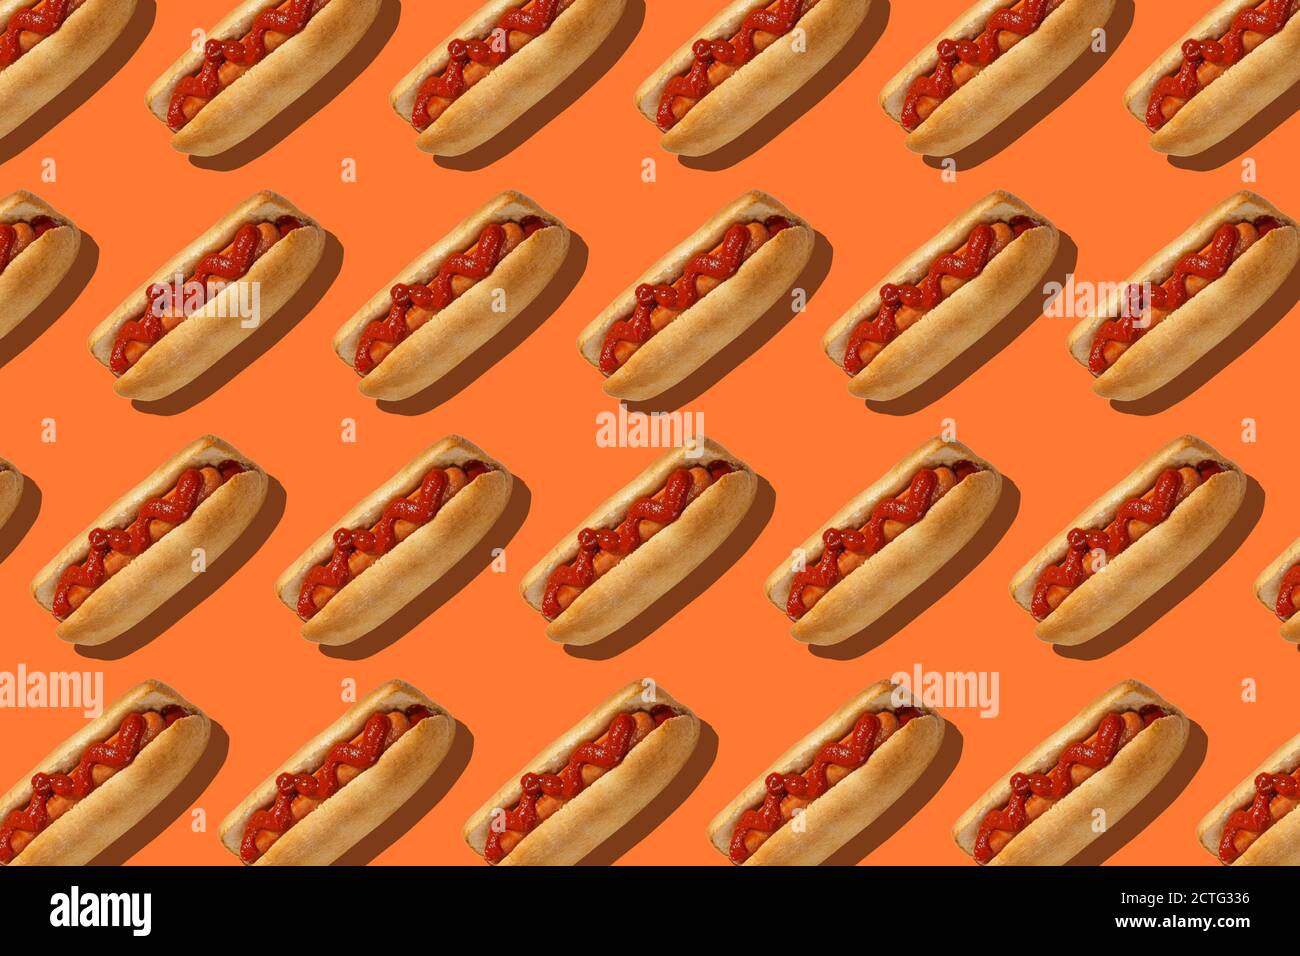 Desktop Wallpaper Hot Dog Food Breads Hd Image Picture Background Nym  P0